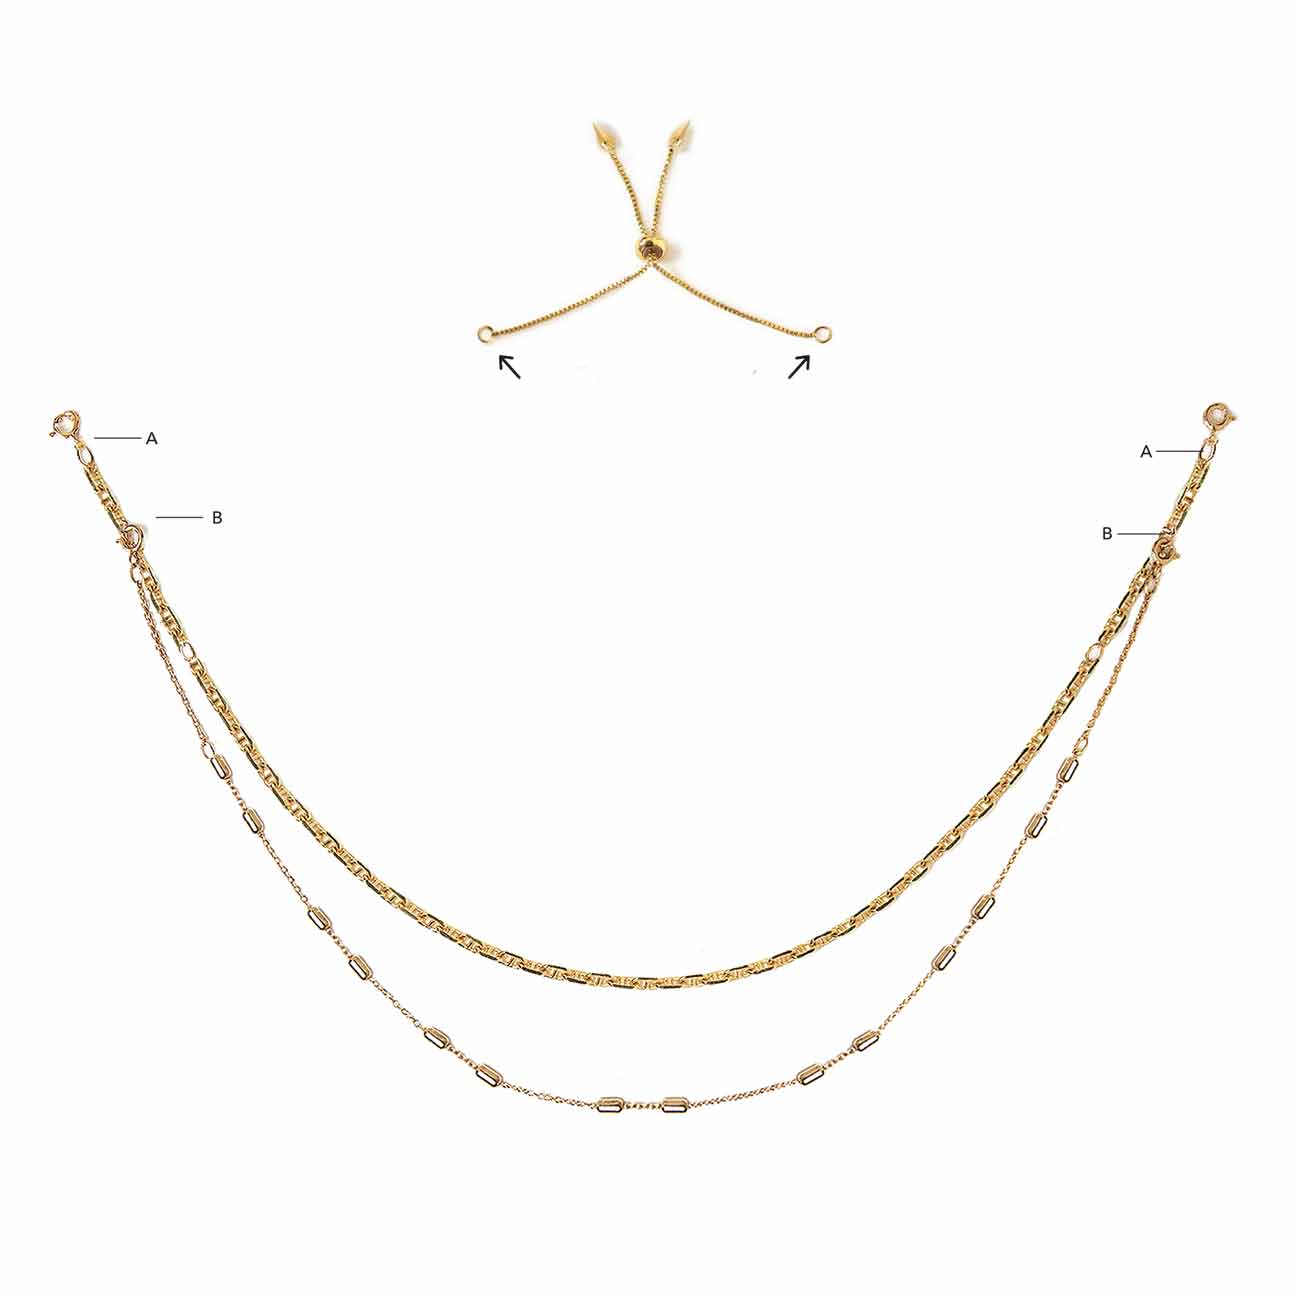 Gold Choker Necklace Extender, Jewelry Extension